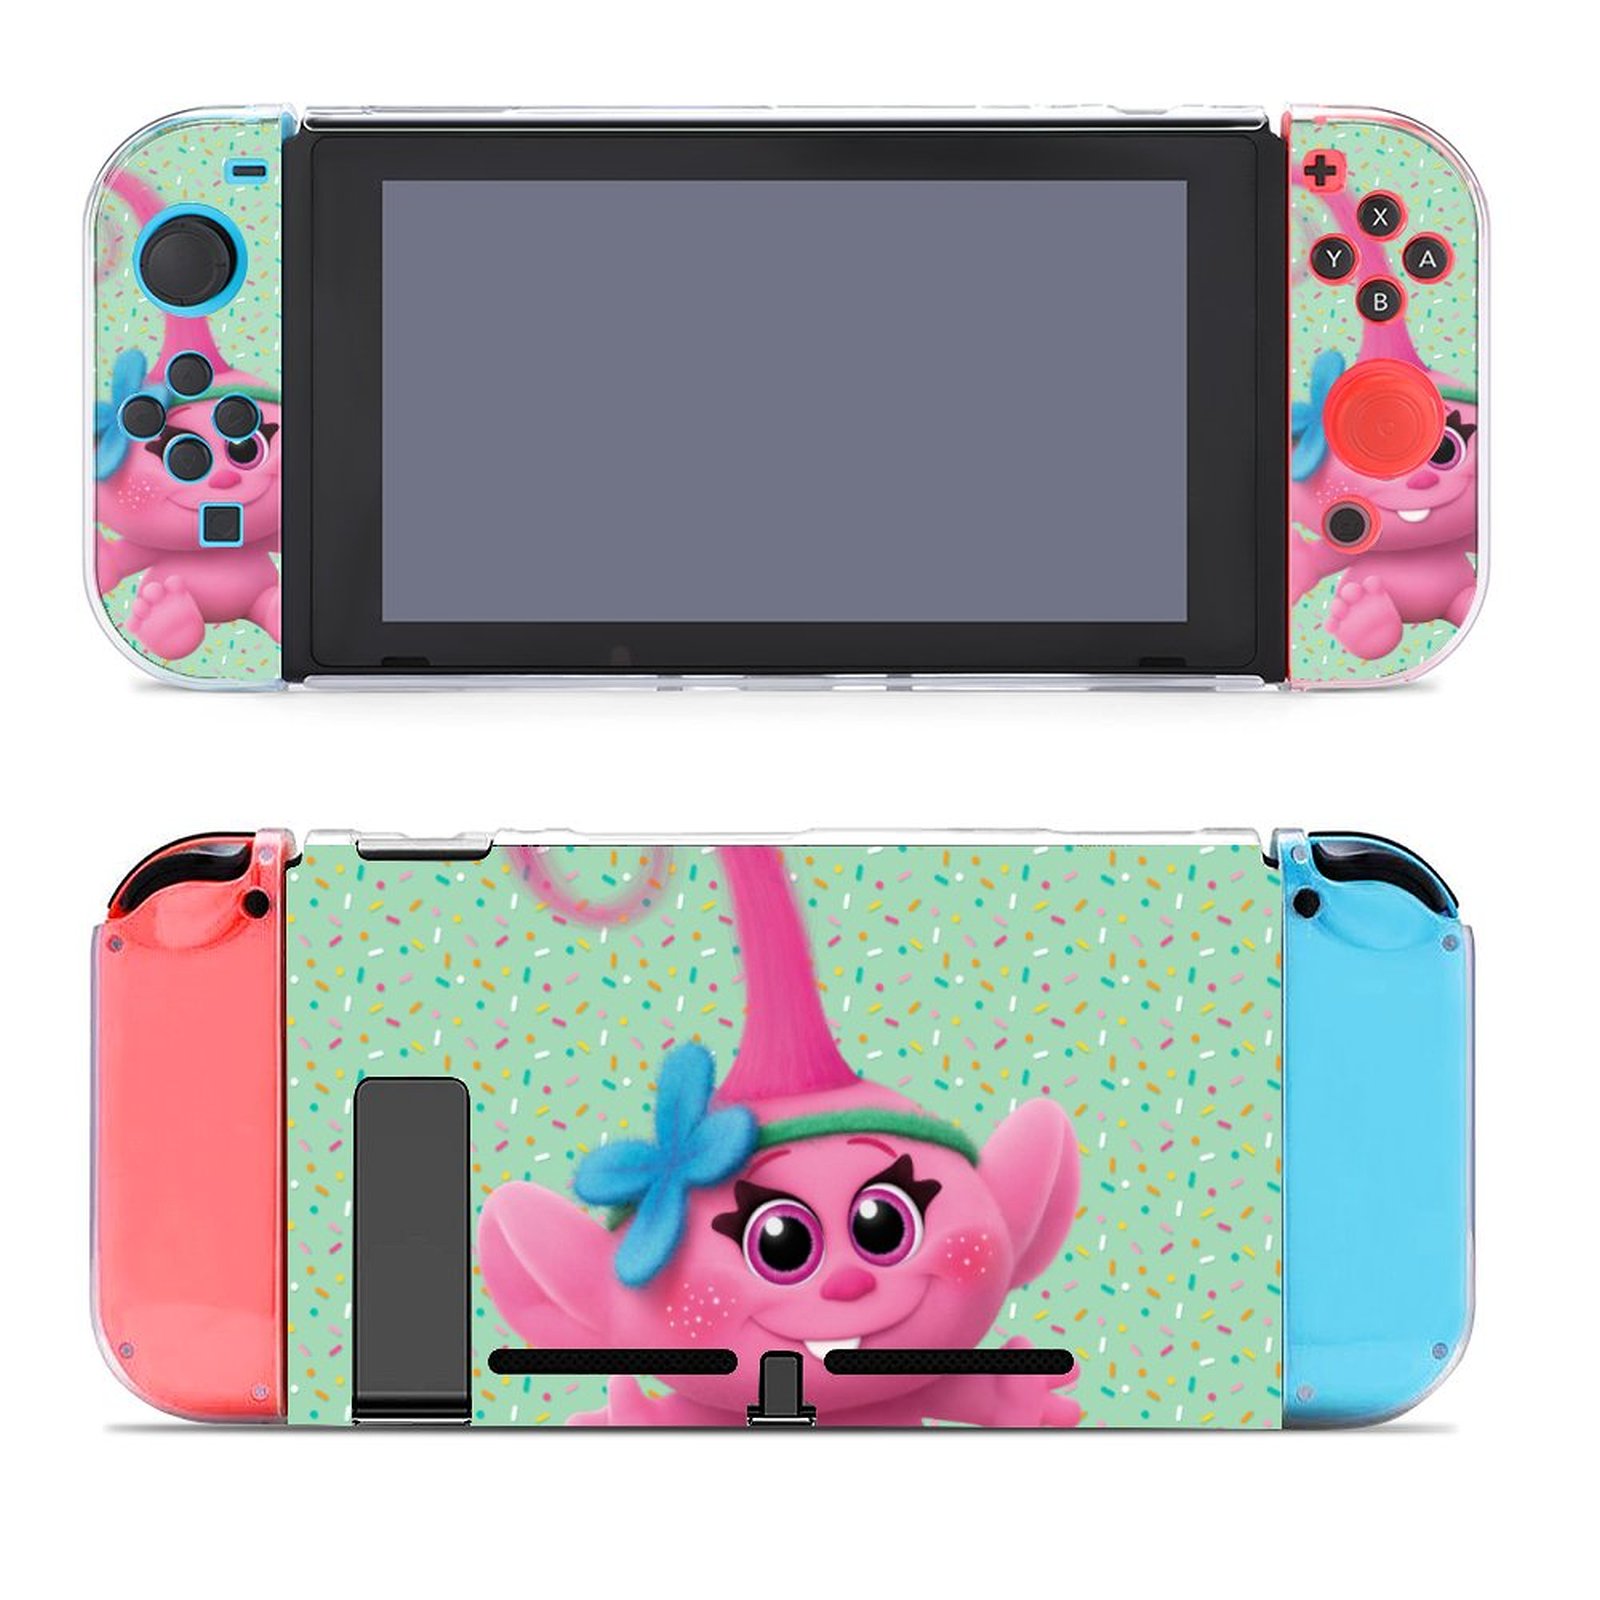 Trolls baby poppy Case for Nintendo Switch Cover Protective Case  Coolcoshirts